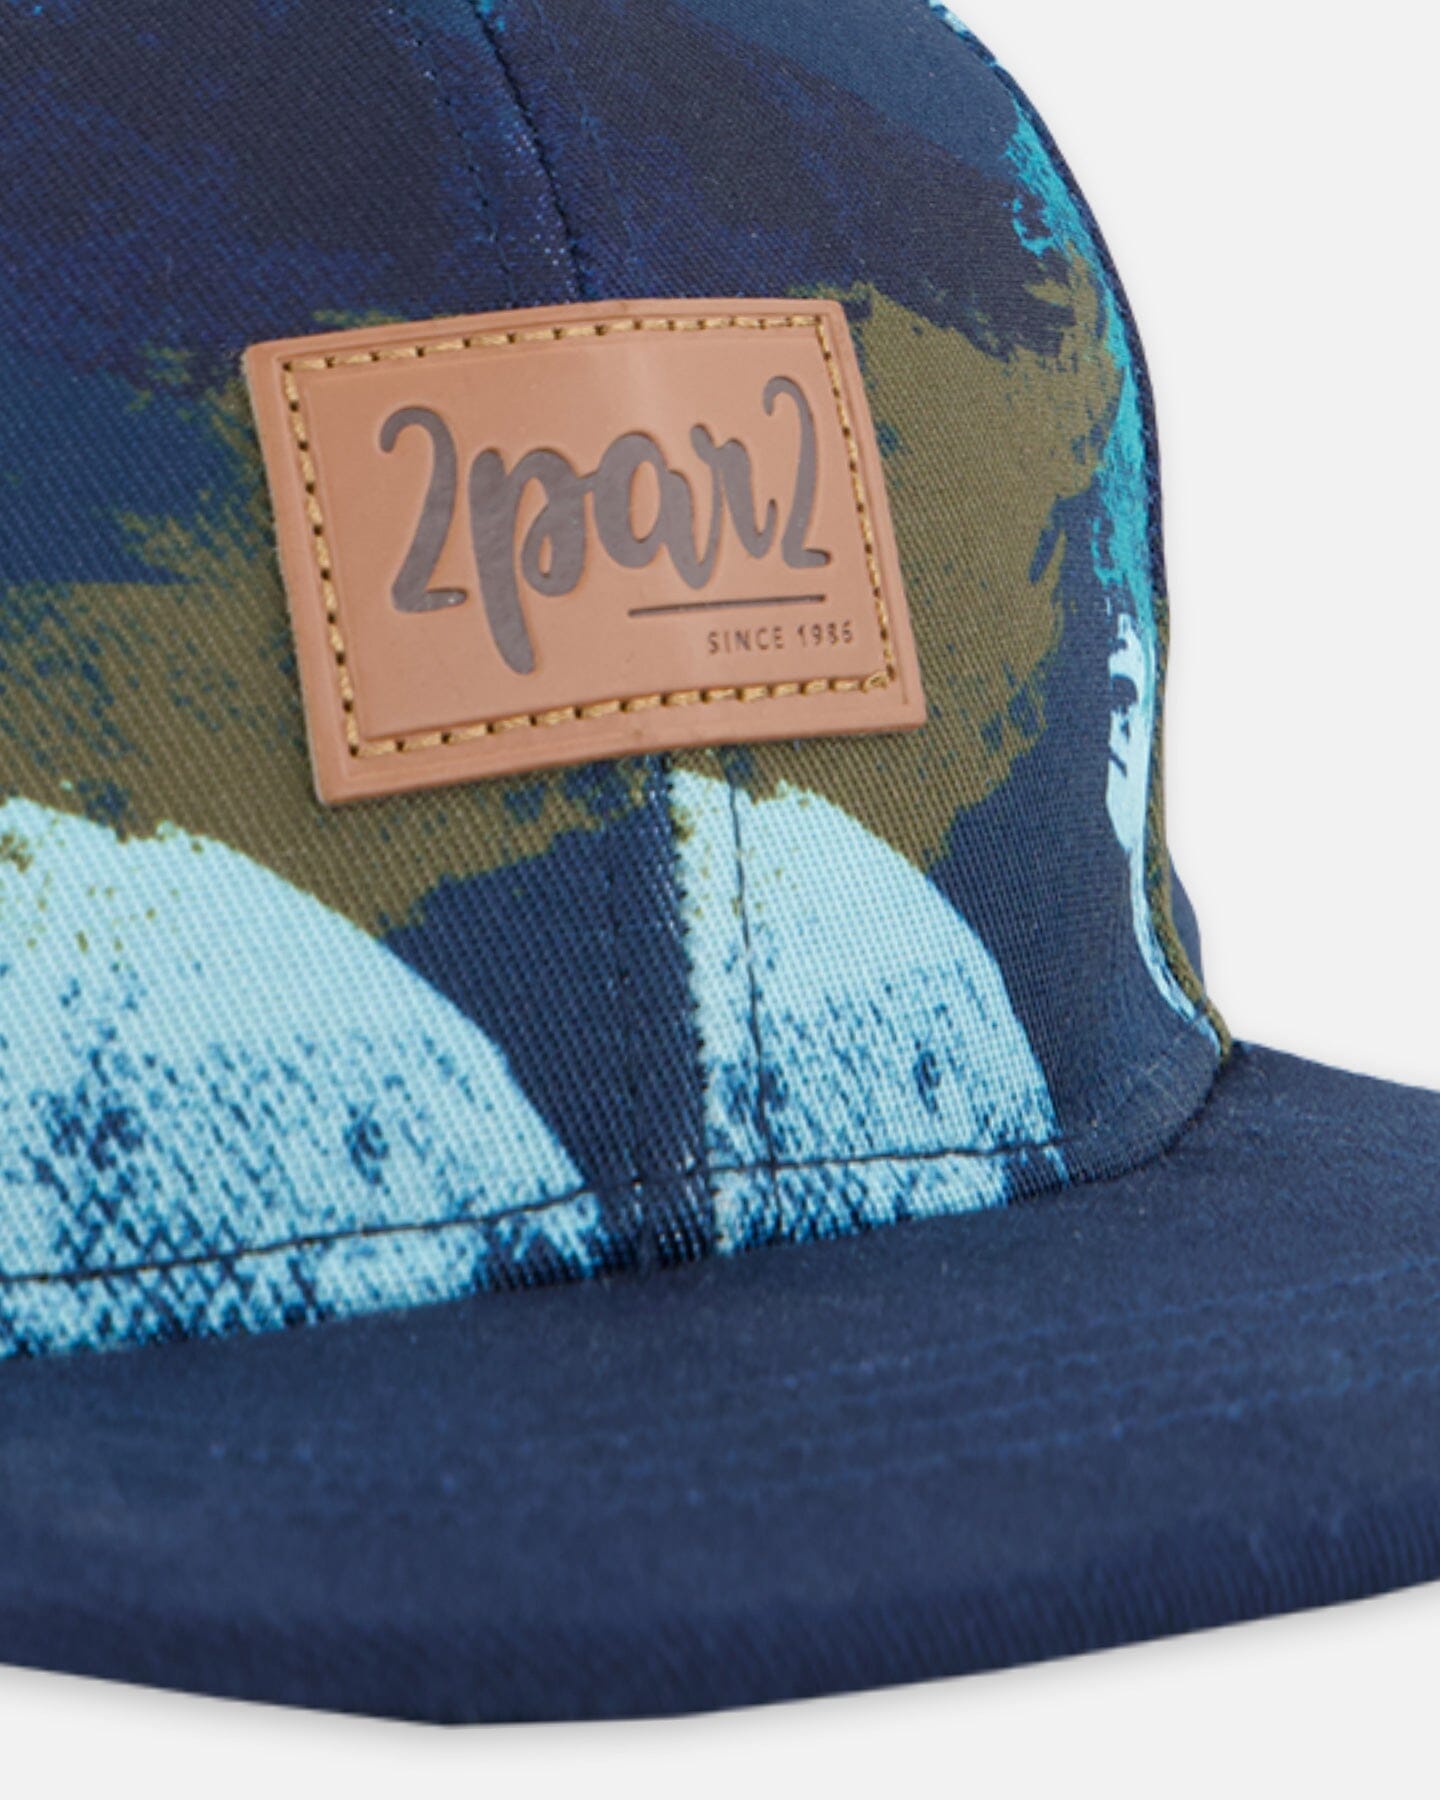 Cap Printed Camouflage Peacoat - F30VC70_481